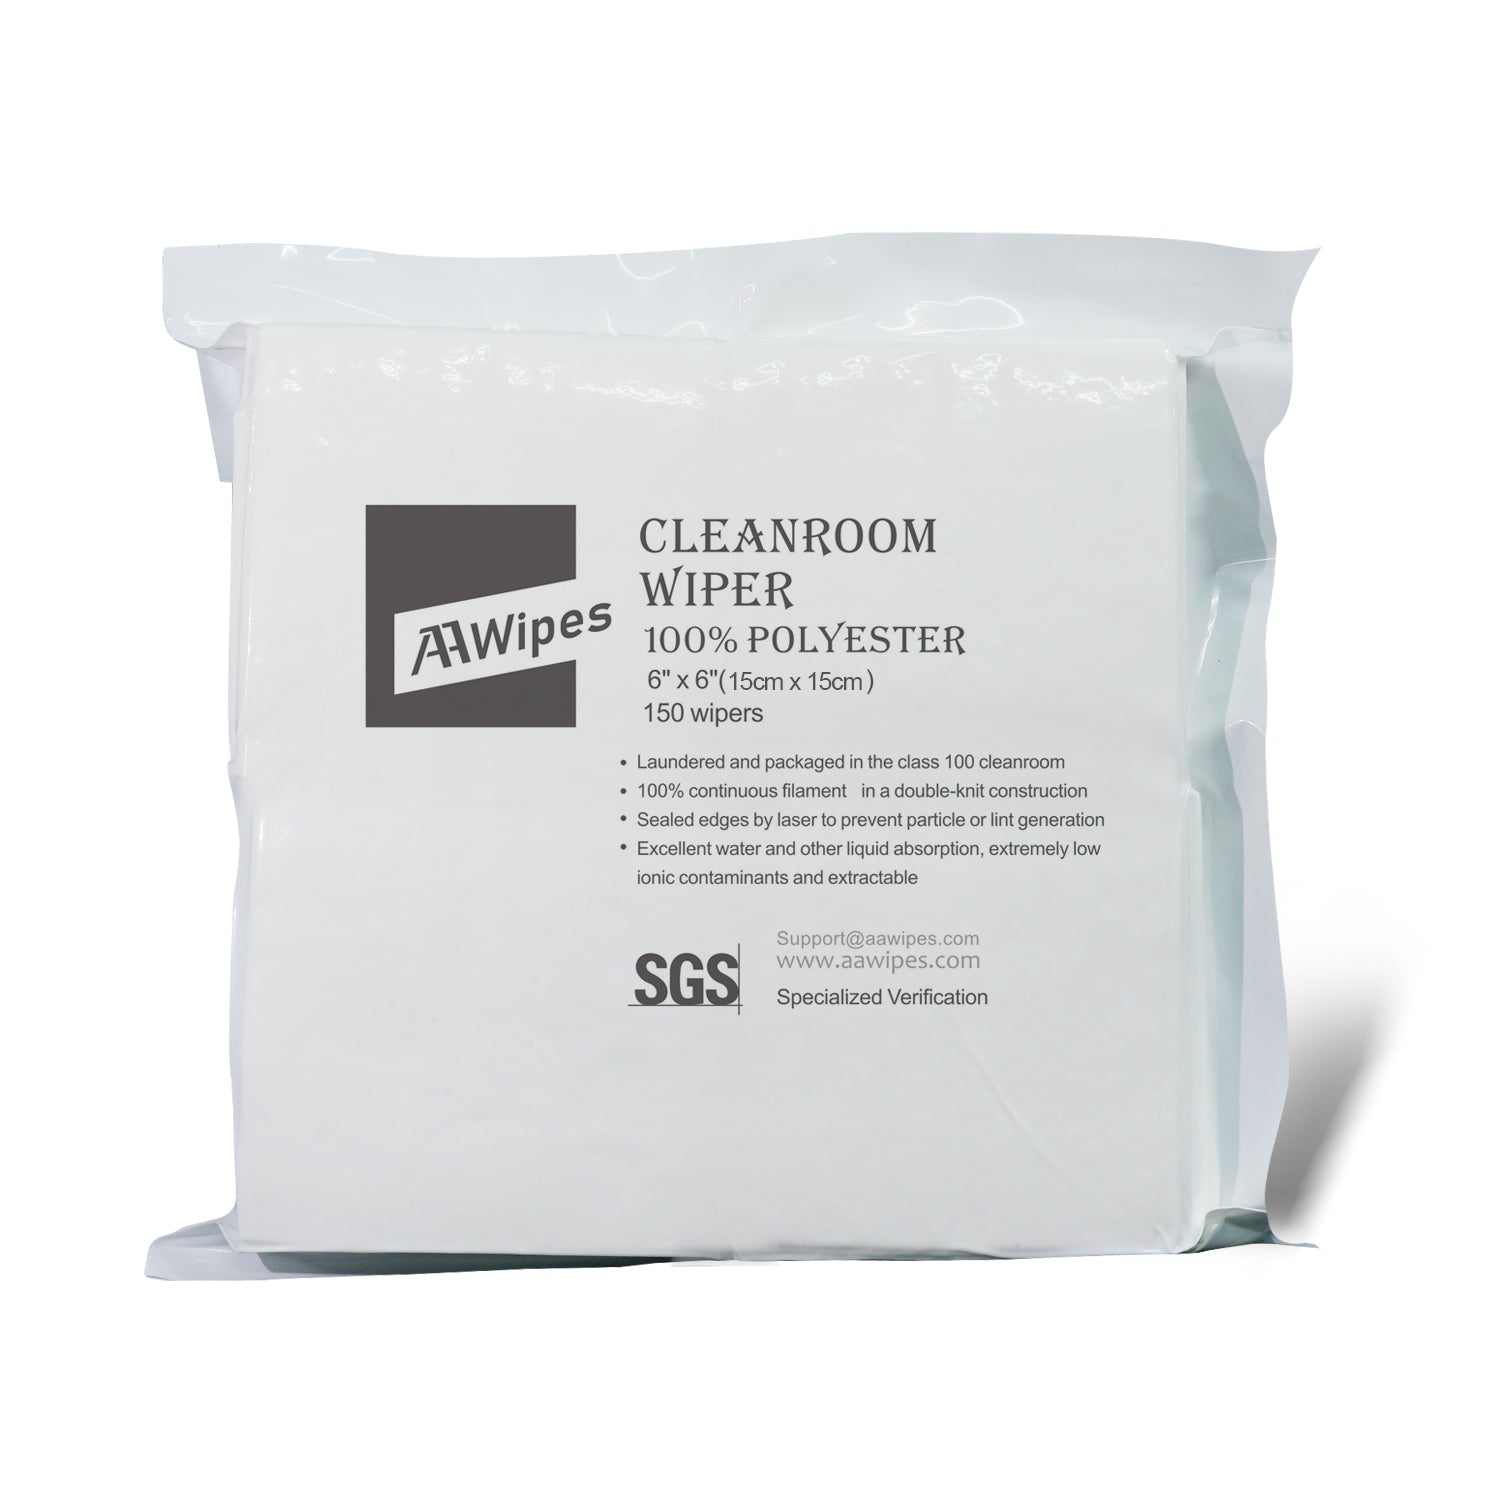 AAwipes  Medical Cleanroom Wipes: 6"x6" Double Knit, 100% Polyester for Sensitive Device Cleaning. 15,000 wipes/case, 100 bags (No. CP14006).